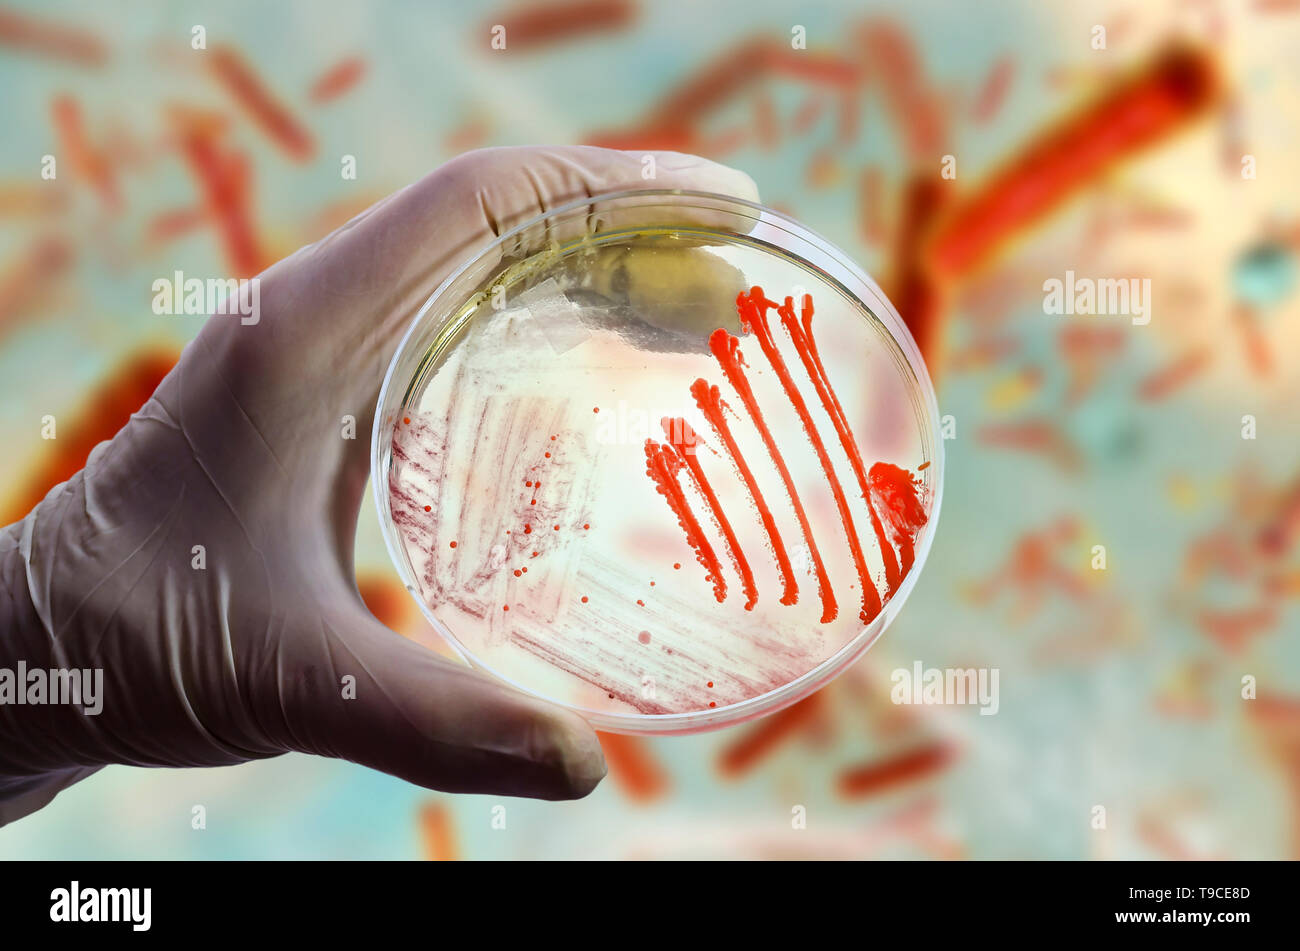 Bacterial and fungal cultures, composite image Stock Photo